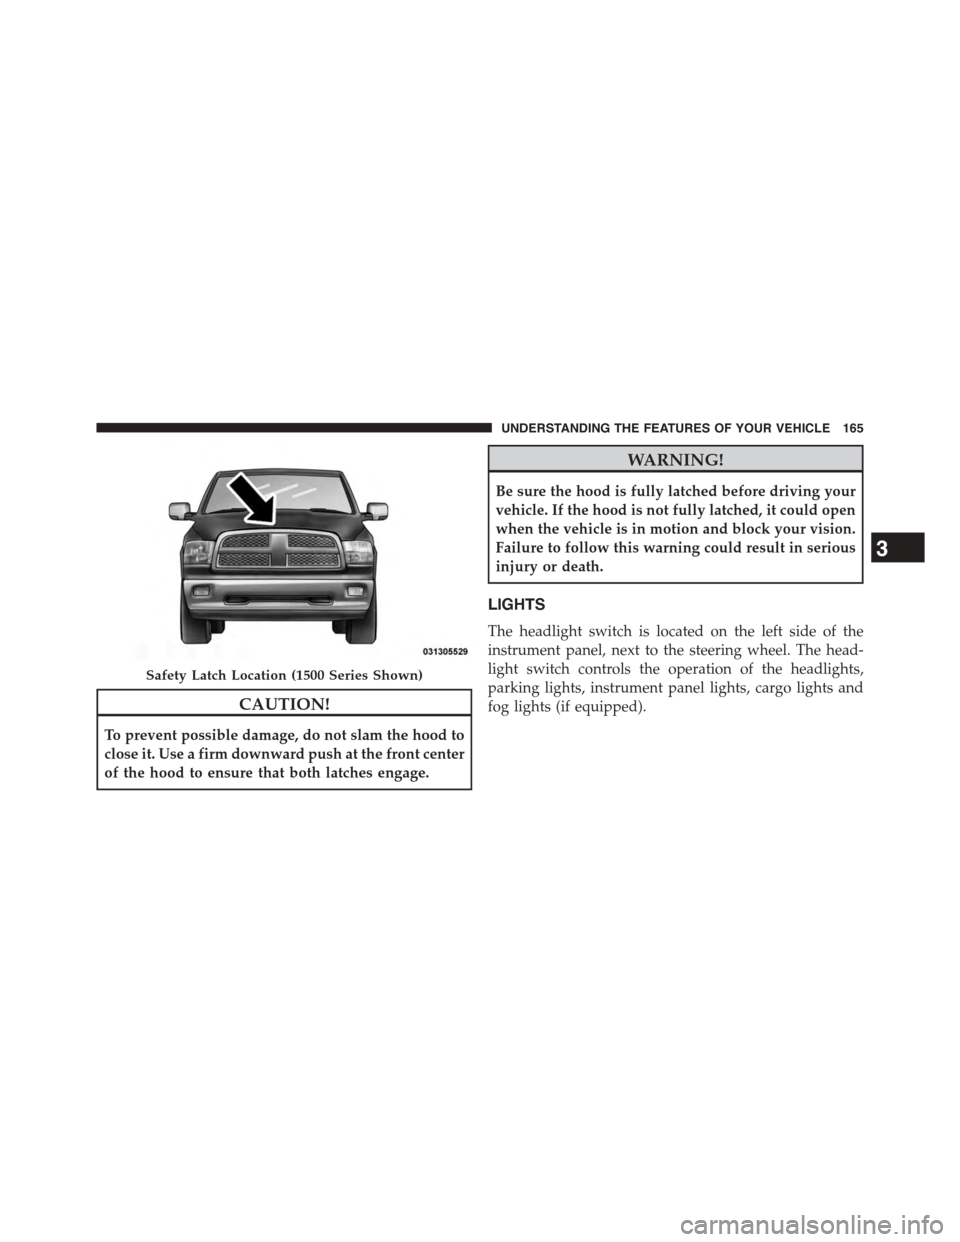 Ram 1500 2015 User Guide CAUTION!
To prevent possible damage, do not slam the hood to
close it. Use a firm downward push at the front center
of the hood to ensure that both latches engage.
WARNING!
Be sure the hood is fully l